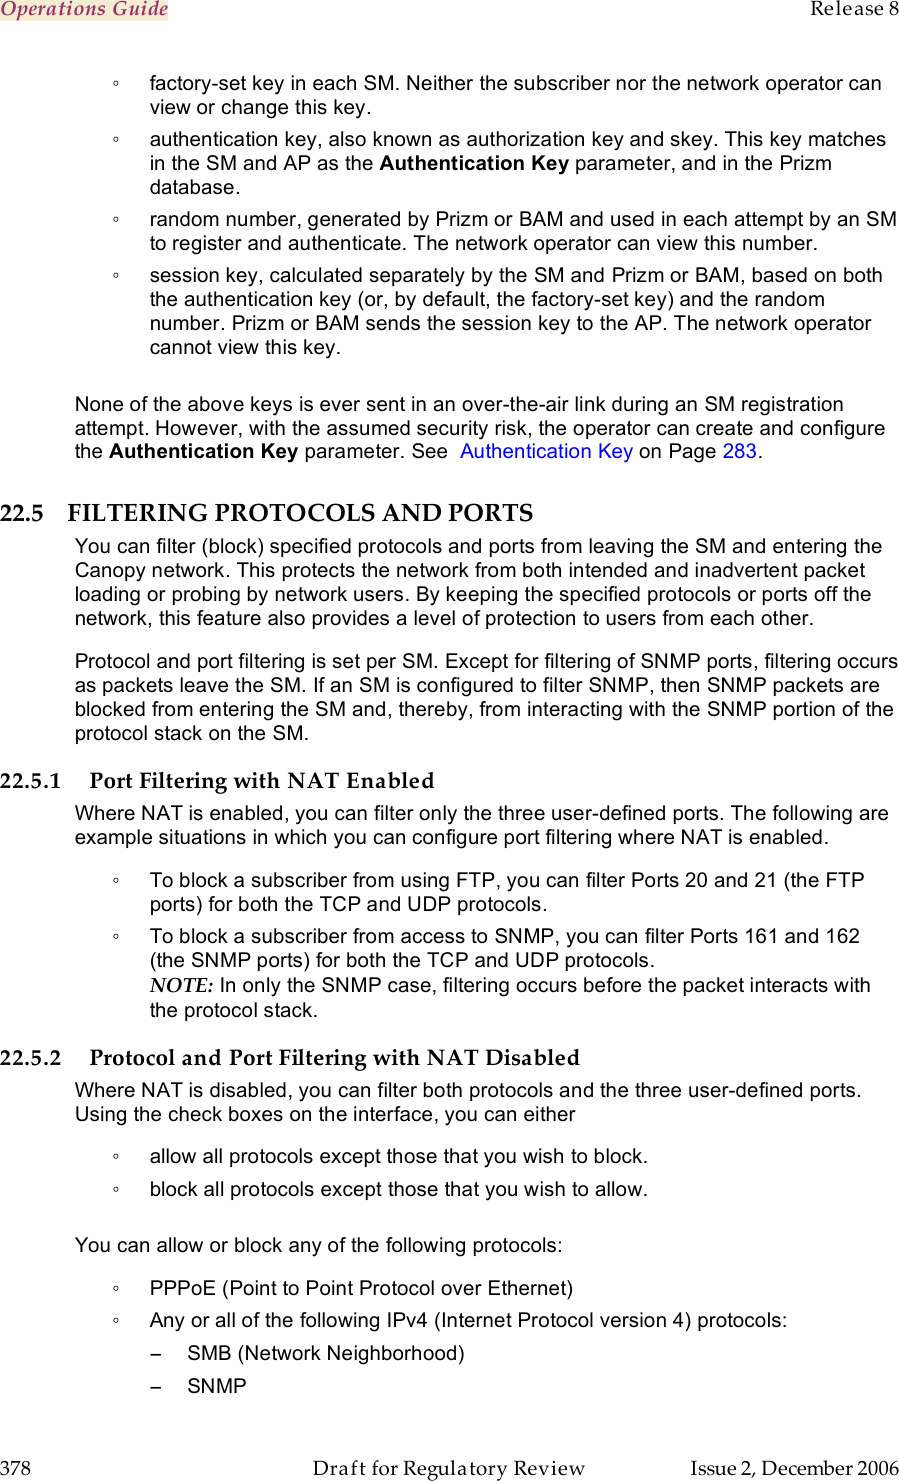 Operations Guide    Release 8   378  Draft for Regulatory Review  Issue 2, December 2006 ◦  factory-set key in each SM. Neither the subscriber nor the network operator can view or change this key. ◦  authentication key, also known as authorization key and skey. This key matches in the SM and AP as the Authentication Key parameter, and in the Prizm database. ◦  random number, generated by Prizm or BAM and used in each attempt by an SM to register and authenticate. The network operator can view this number. ◦  session key, calculated separately by the SM and Prizm or BAM, based on both the authentication key (or, by default, the factory-set key) and the random number. Prizm or BAM sends the session key to the AP. The network operator cannot view this key.  None of the above keys is ever sent in an over-the-air link during an SM registration attempt. However, with the assumed security risk, the operator can create and configure the Authentication Key parameter. See  Authentication Key on Page 283.  22.5 FILTERING PROTOCOLS AND PORTS You can filter (block) specified protocols and ports from leaving the SM and entering the Canopy network. This protects the network from both intended and inadvertent packet loading or probing by network users. By keeping the specified protocols or ports off the network, this feature also provides a level of protection to users from each other. Protocol and port filtering is set per SM. Except for filtering of SNMP ports, filtering occurs as packets leave the SM. If an SM is configured to filter SNMP, then SNMP packets are blocked from entering the SM and, thereby, from interacting with the SNMP portion of the protocol stack on the SM. 22.5.1 Port Filtering with NAT Enabled Where NAT is enabled, you can filter only the three user-defined ports. The following are example situations in which you can configure port filtering where NAT is enabled. ◦  To block a subscriber from using FTP, you can filter Ports 20 and 21 (the FTP ports) for both the TCP and UDP protocols.  ◦  To block a subscriber from access to SNMP, you can filter Ports 161 and 162 (the SNMP ports) for both the TCP and UDP protocols.  NOTE: In only the SNMP case, filtering occurs before the packet interacts with the protocol stack. 22.5.2 Protocol and Port Filtering with NAT Disabled Where NAT is disabled, you can filter both protocols and the three user-defined ports. Using the check boxes on the interface, you can either  ◦  allow all protocols except those that you wish to block. ◦  block all protocols except those that you wish to allow.  You can allow or block any of the following protocols: ◦  PPPoE (Point to Point Protocol over Ethernet) ◦  Any or all of the following IPv4 (Internet Protocol version 4) protocols: −  SMB (Network Neighborhood) −  SNMP 